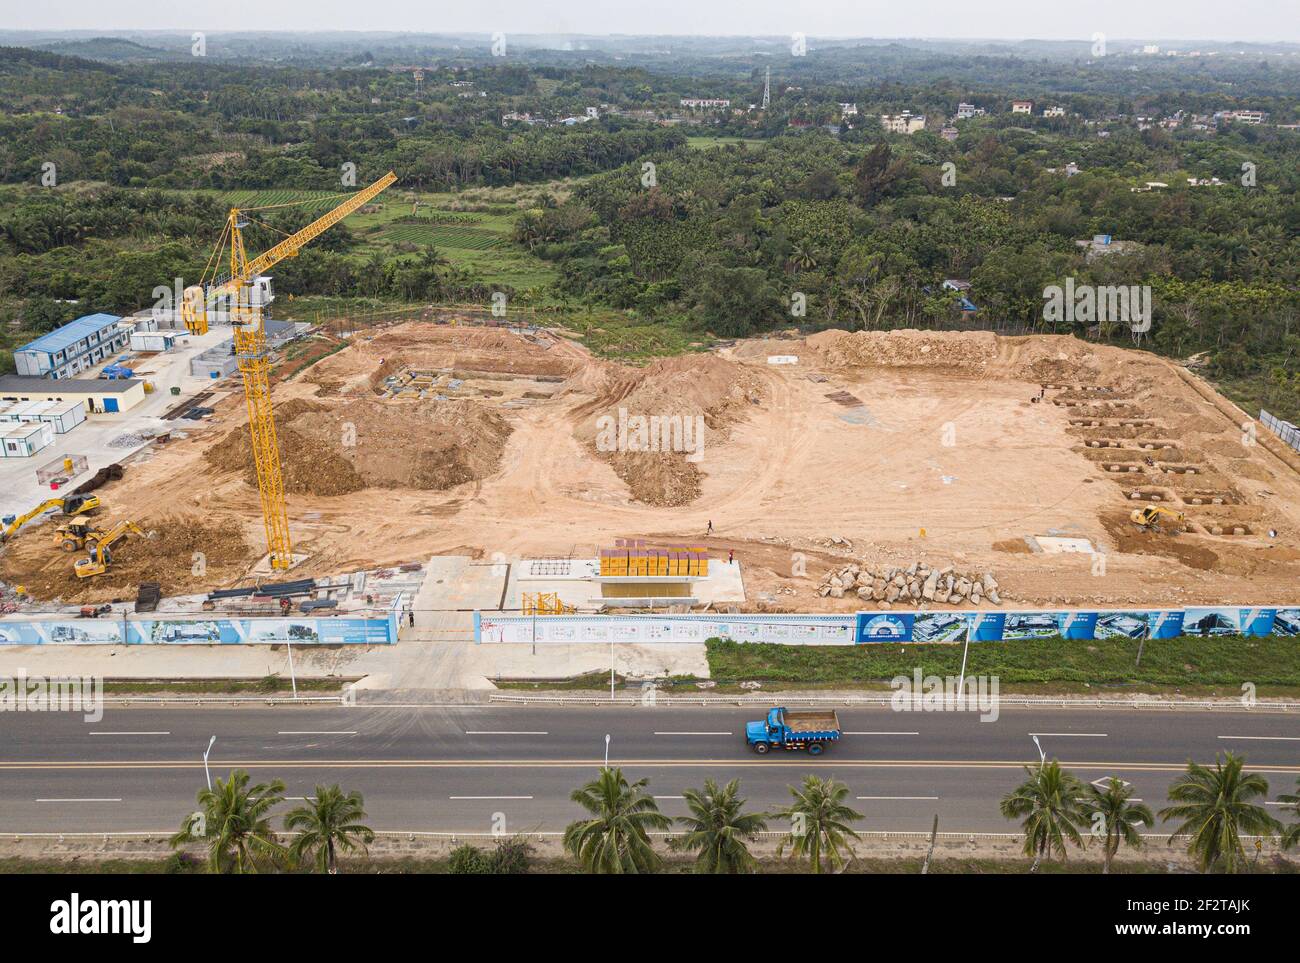 Wenchang, China's Hainan Province. 13th Mar, 2021. Aerial photo shows the construction site of an aerospace supercomputing center project in Wenchang, south China's Hainan Province, March 13, 2021. The project is one of the key parts of the construction of the Hainan Free Trade Port. Credit: Pu Xiaoxu/Xinhua/Alamy Live News Stock Photo